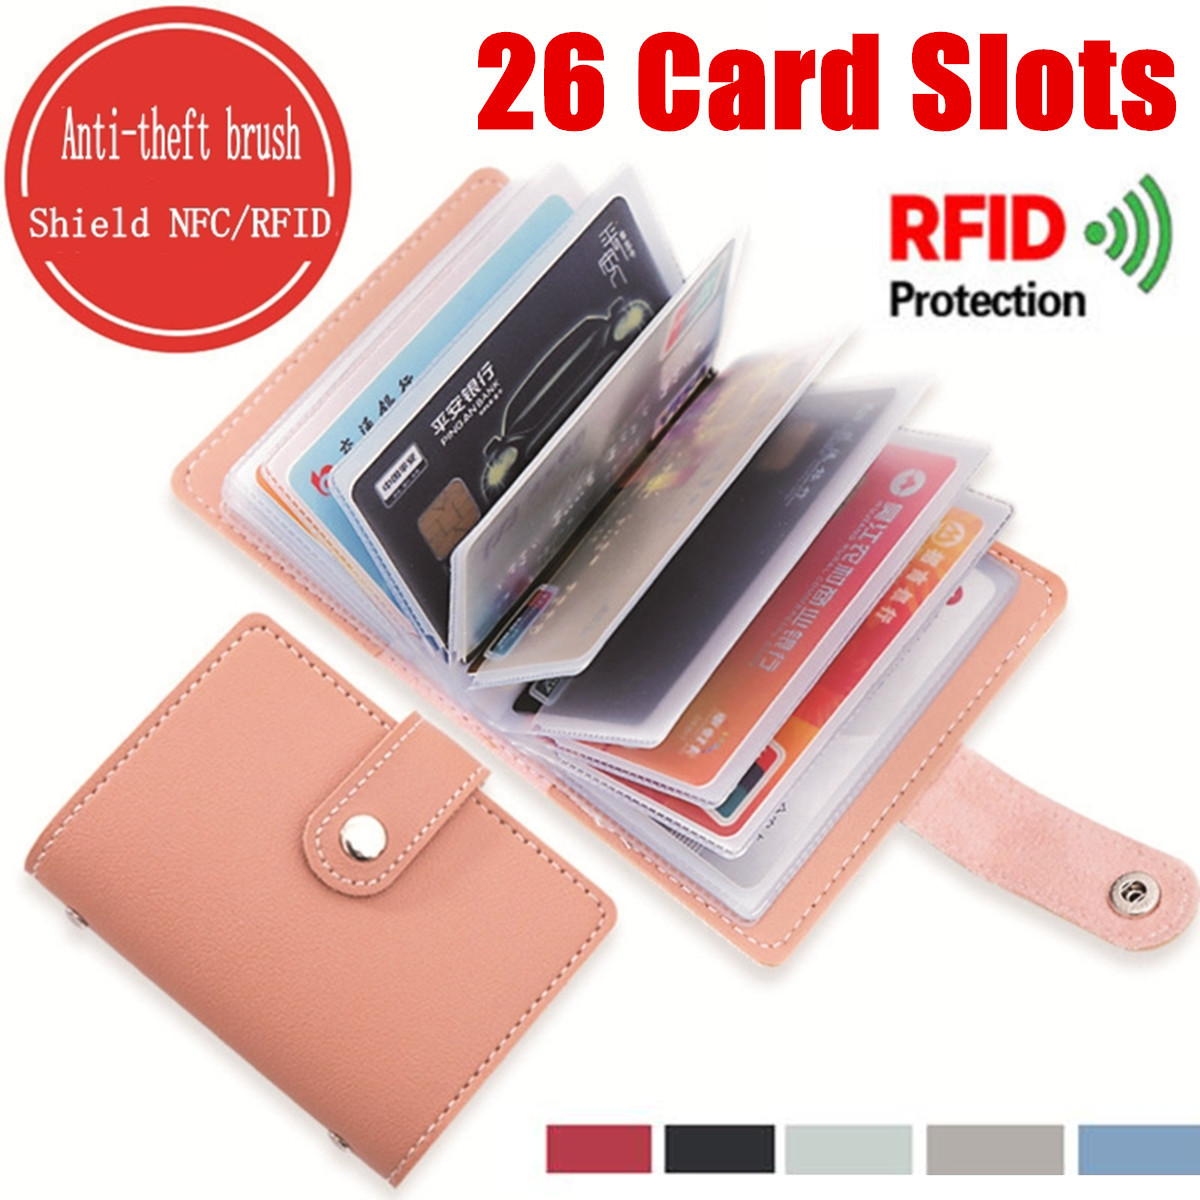 26-Card-Slots-Portable-Leather-Wallet-Anti-theft-Brush-Shield-NFCRFID-Card-Holder-1644277-1